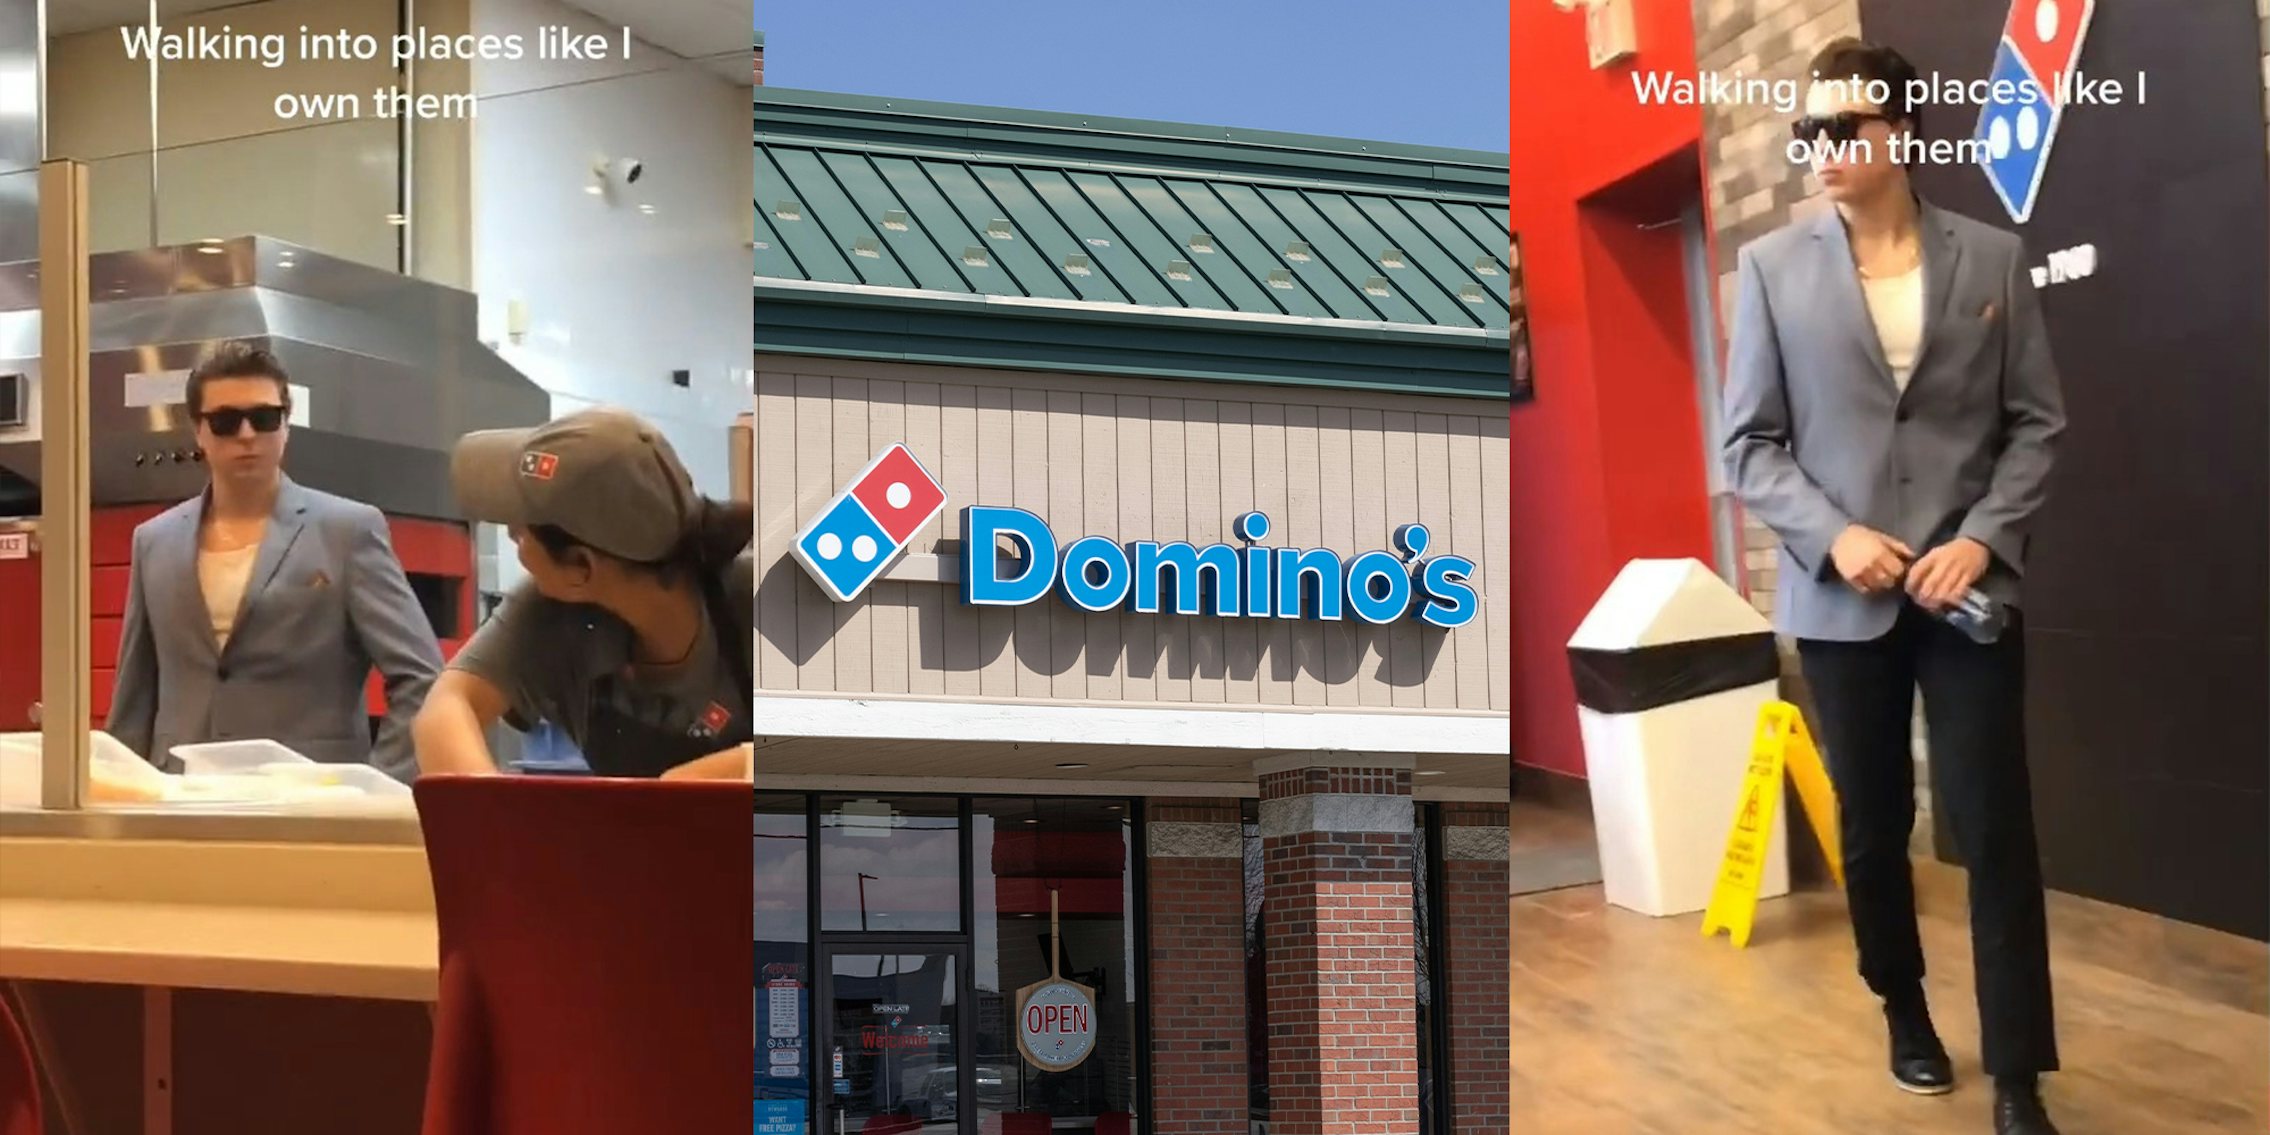 Domino’s customer puts on suit and sunglasses and walks into the kitchen. The workers thought he was in charge